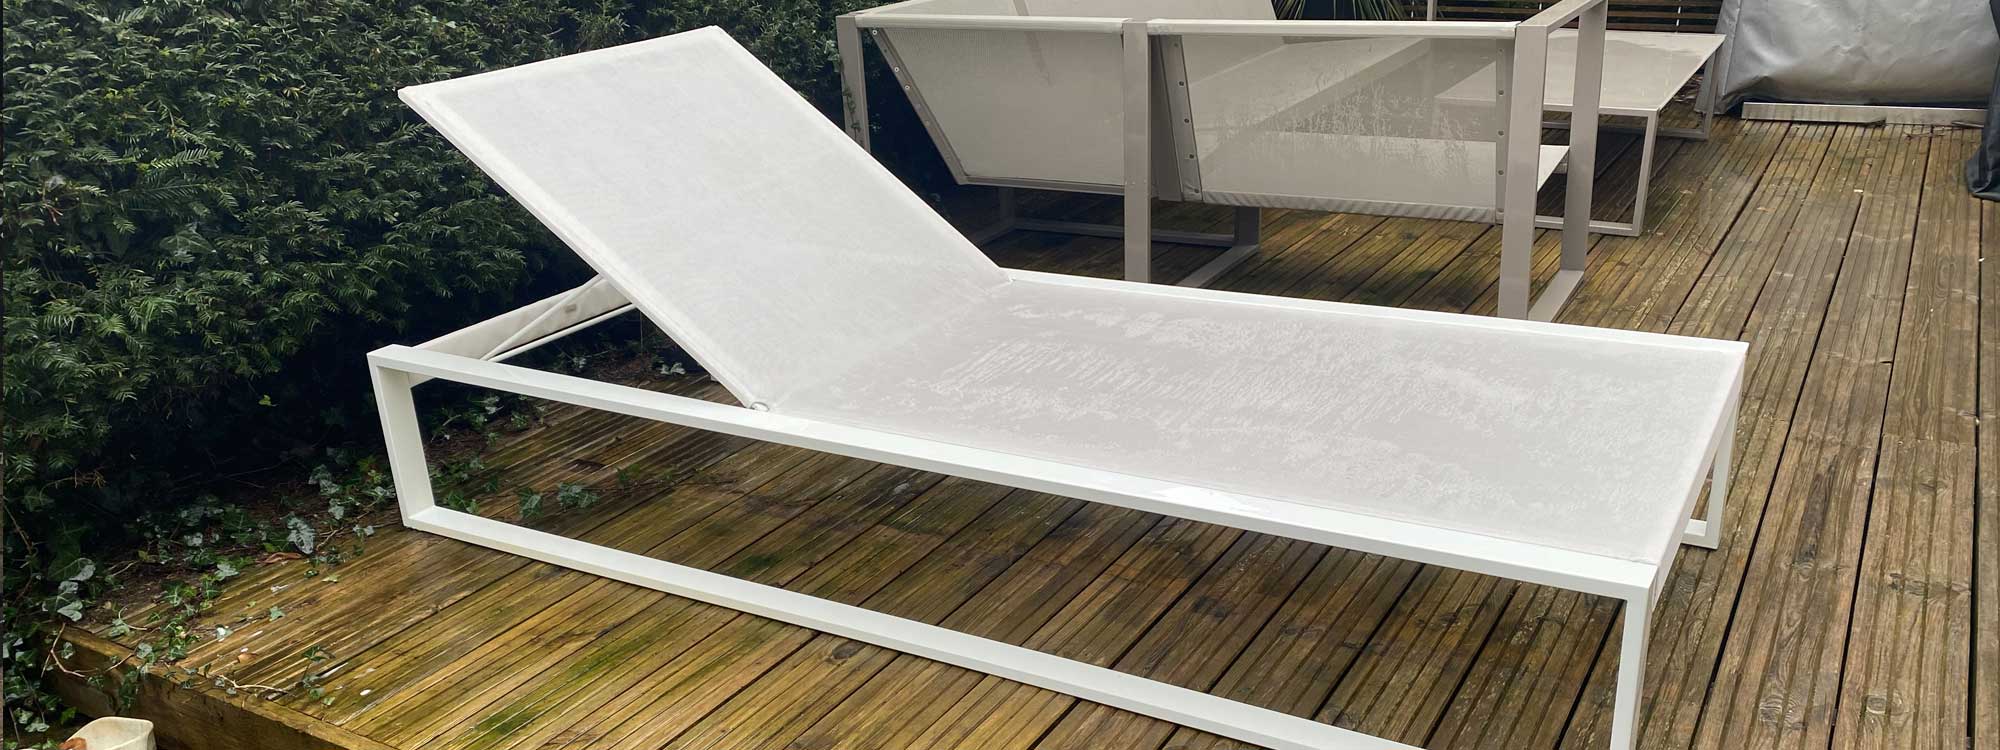 Image of FueraDentro Siesta luxury sun lounger in white stainless steel and white batyline